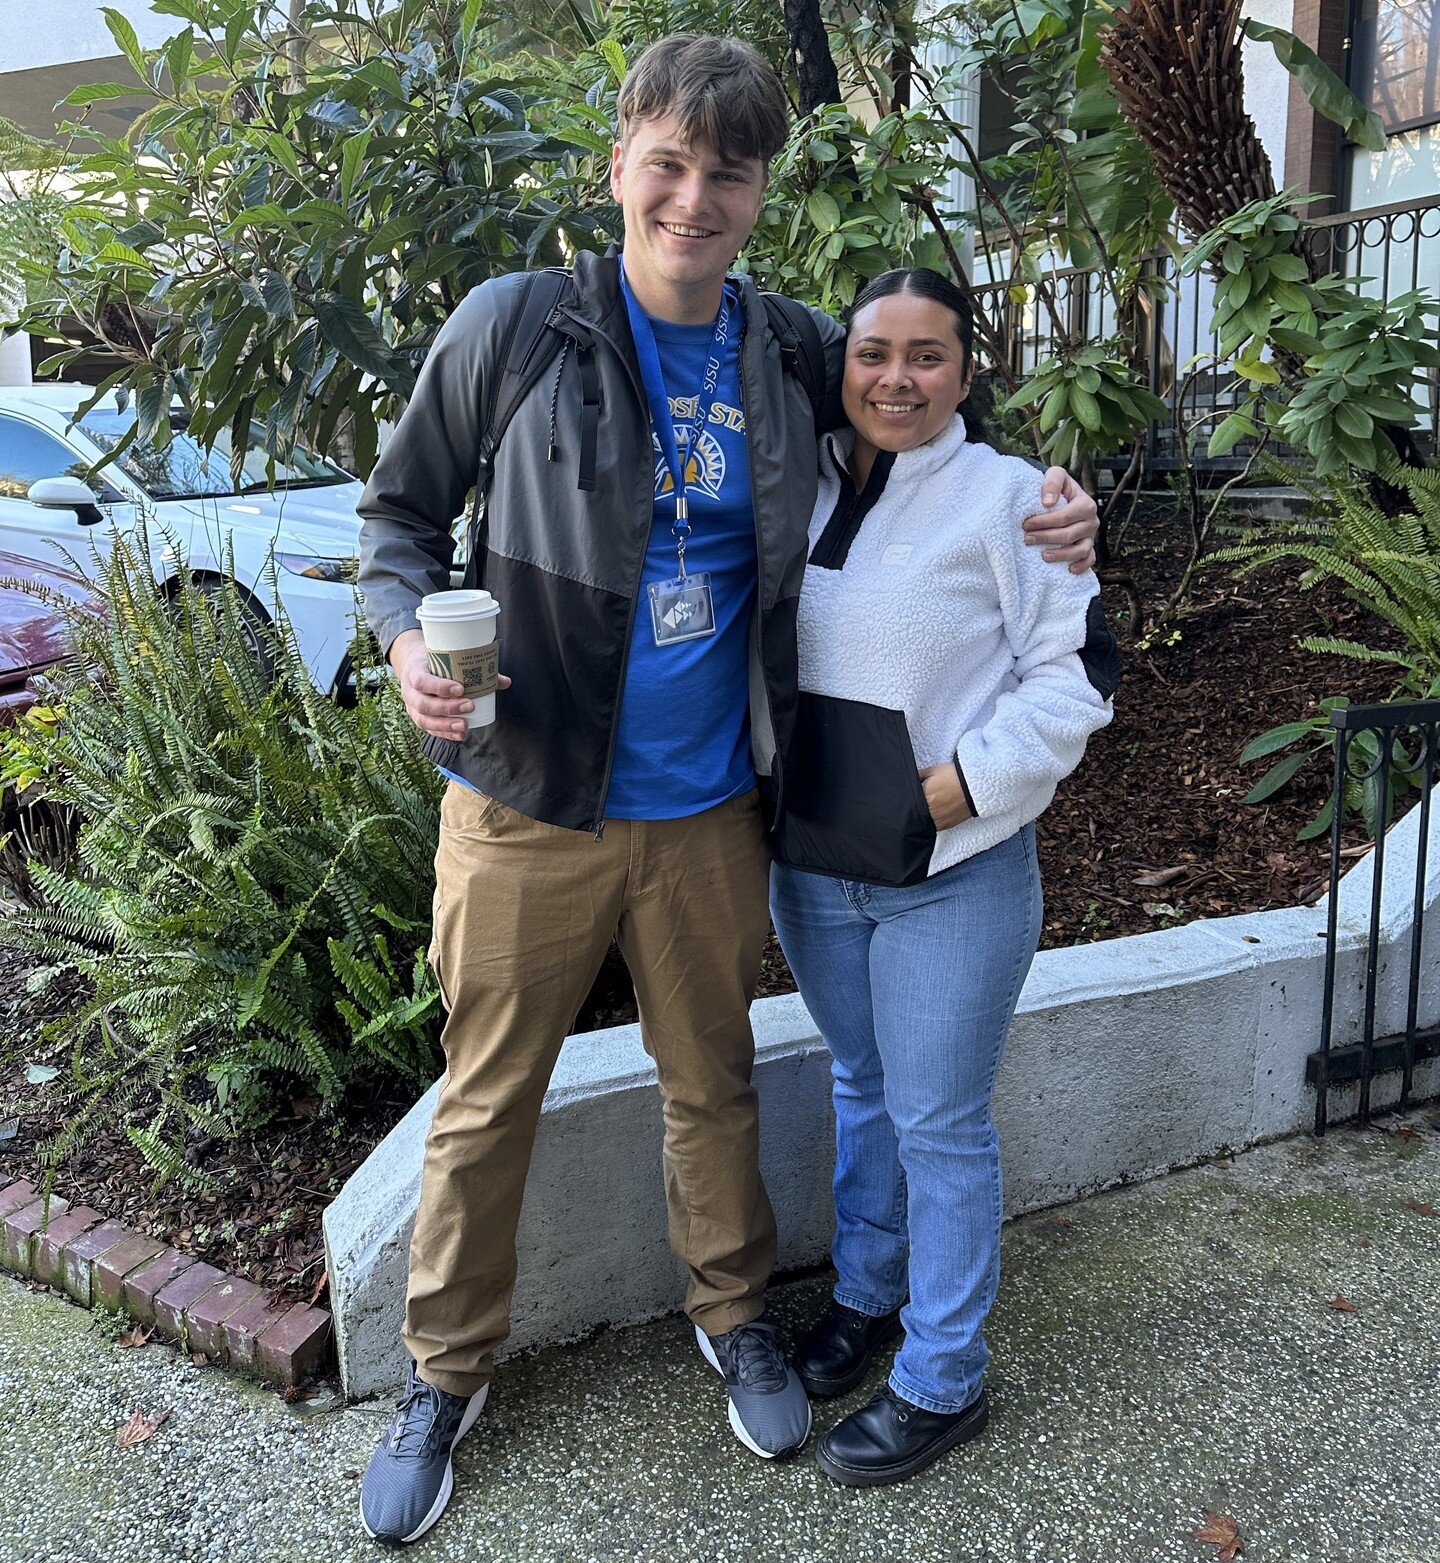 We're celebrating Simon's first day at @sjsu with a super-sized shoutout! Congratulations on starting your college journey!
#gospartans #celebrate #sjsu #congratulations #inclusionmatters